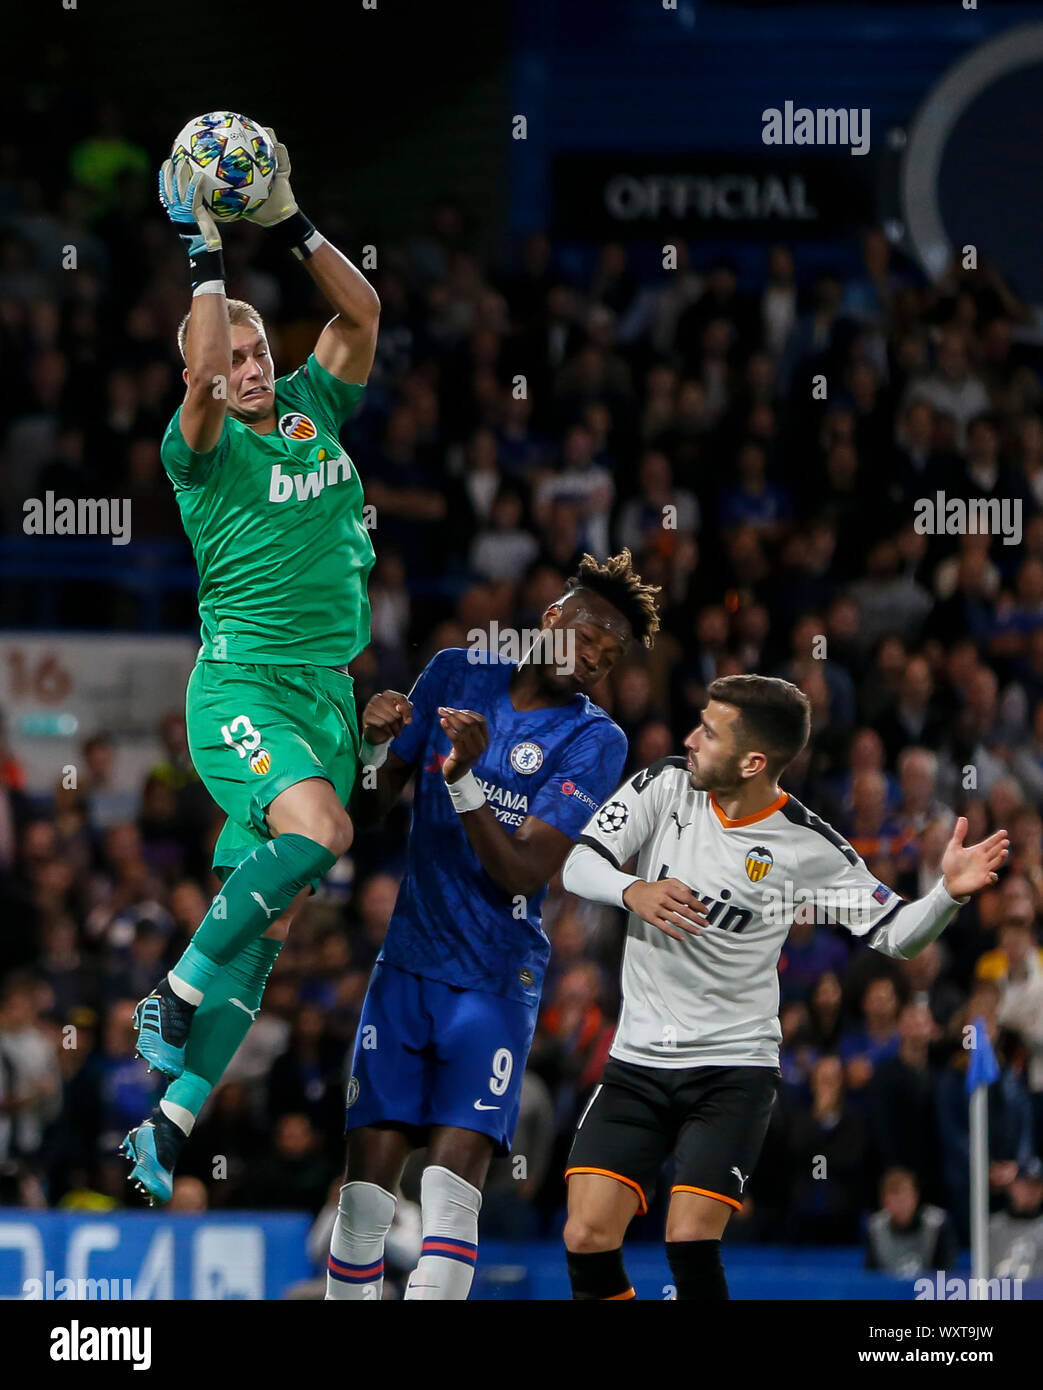 London, UK. 17th Sep, 2019. Valencia's goalkeeper Jasper Cillessen (L) saves the ball during the UEFA Champions League Group H match between Chelsea and Valencia at Stamford Bridge Stadium in London, Britain on Sept. 17, 2019. Chelsea lost 0-1. Credit: Han Yan/Xinhua/Alamy Live News Stock Photo